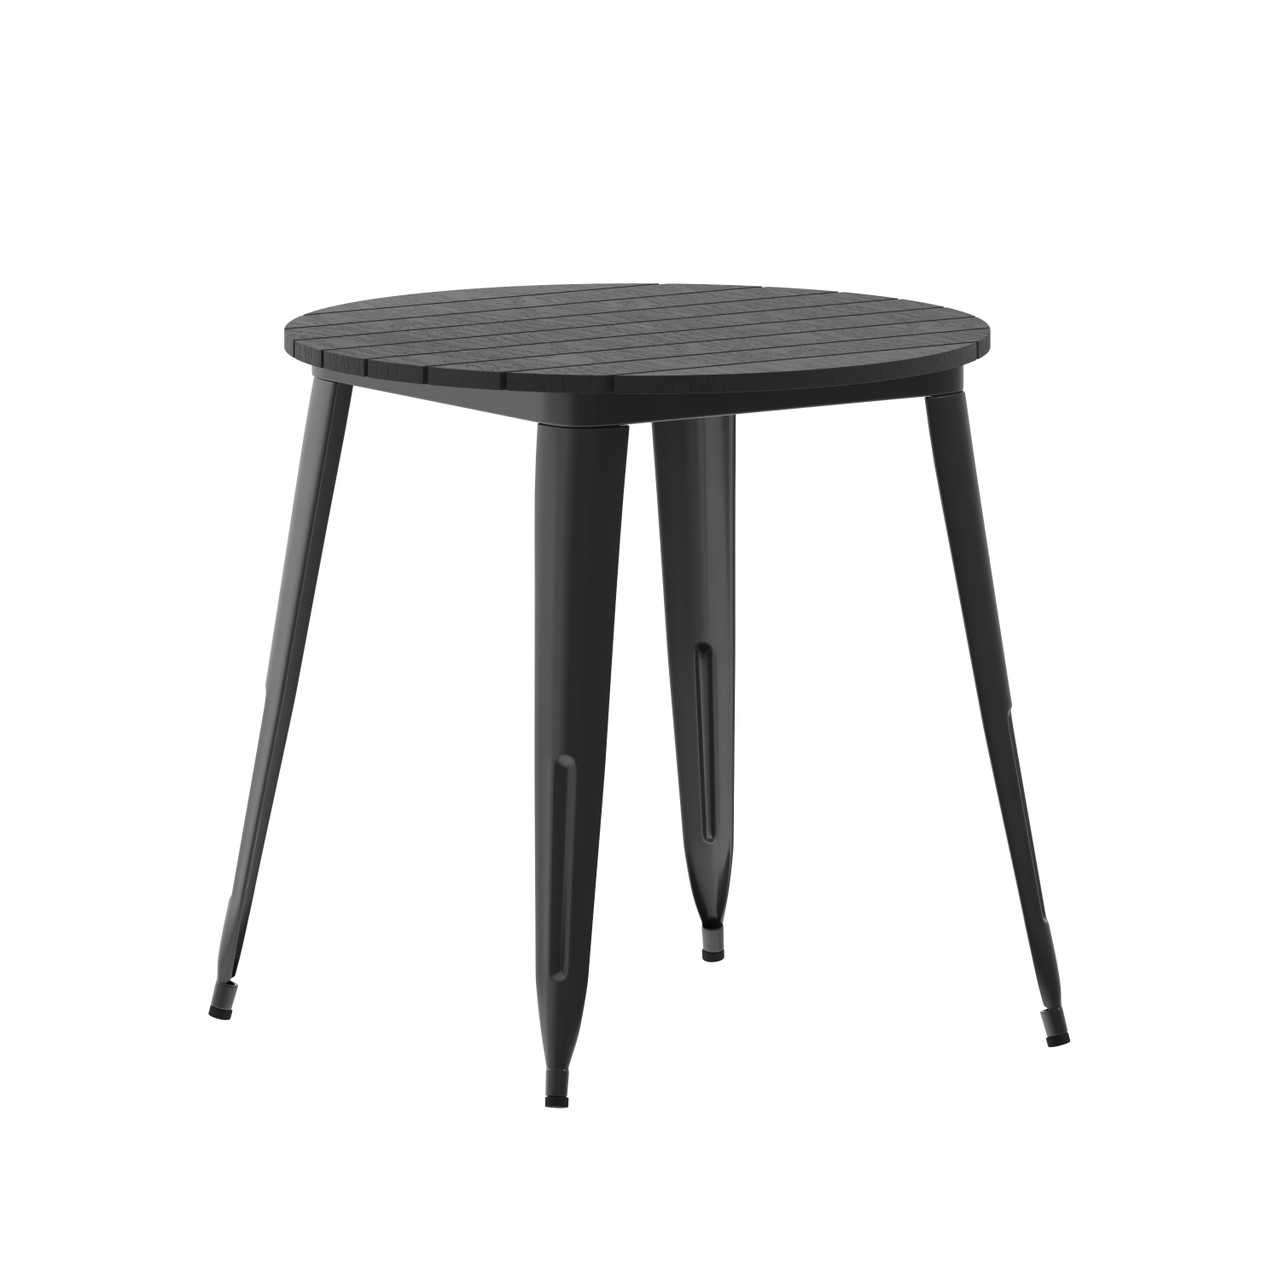 Flash Furniture Declan Commercial Grade Indoor/Outdoor Dining Table, 30" Round All Weather Black Poly Resin Top w/ Black Steel Base, Model#